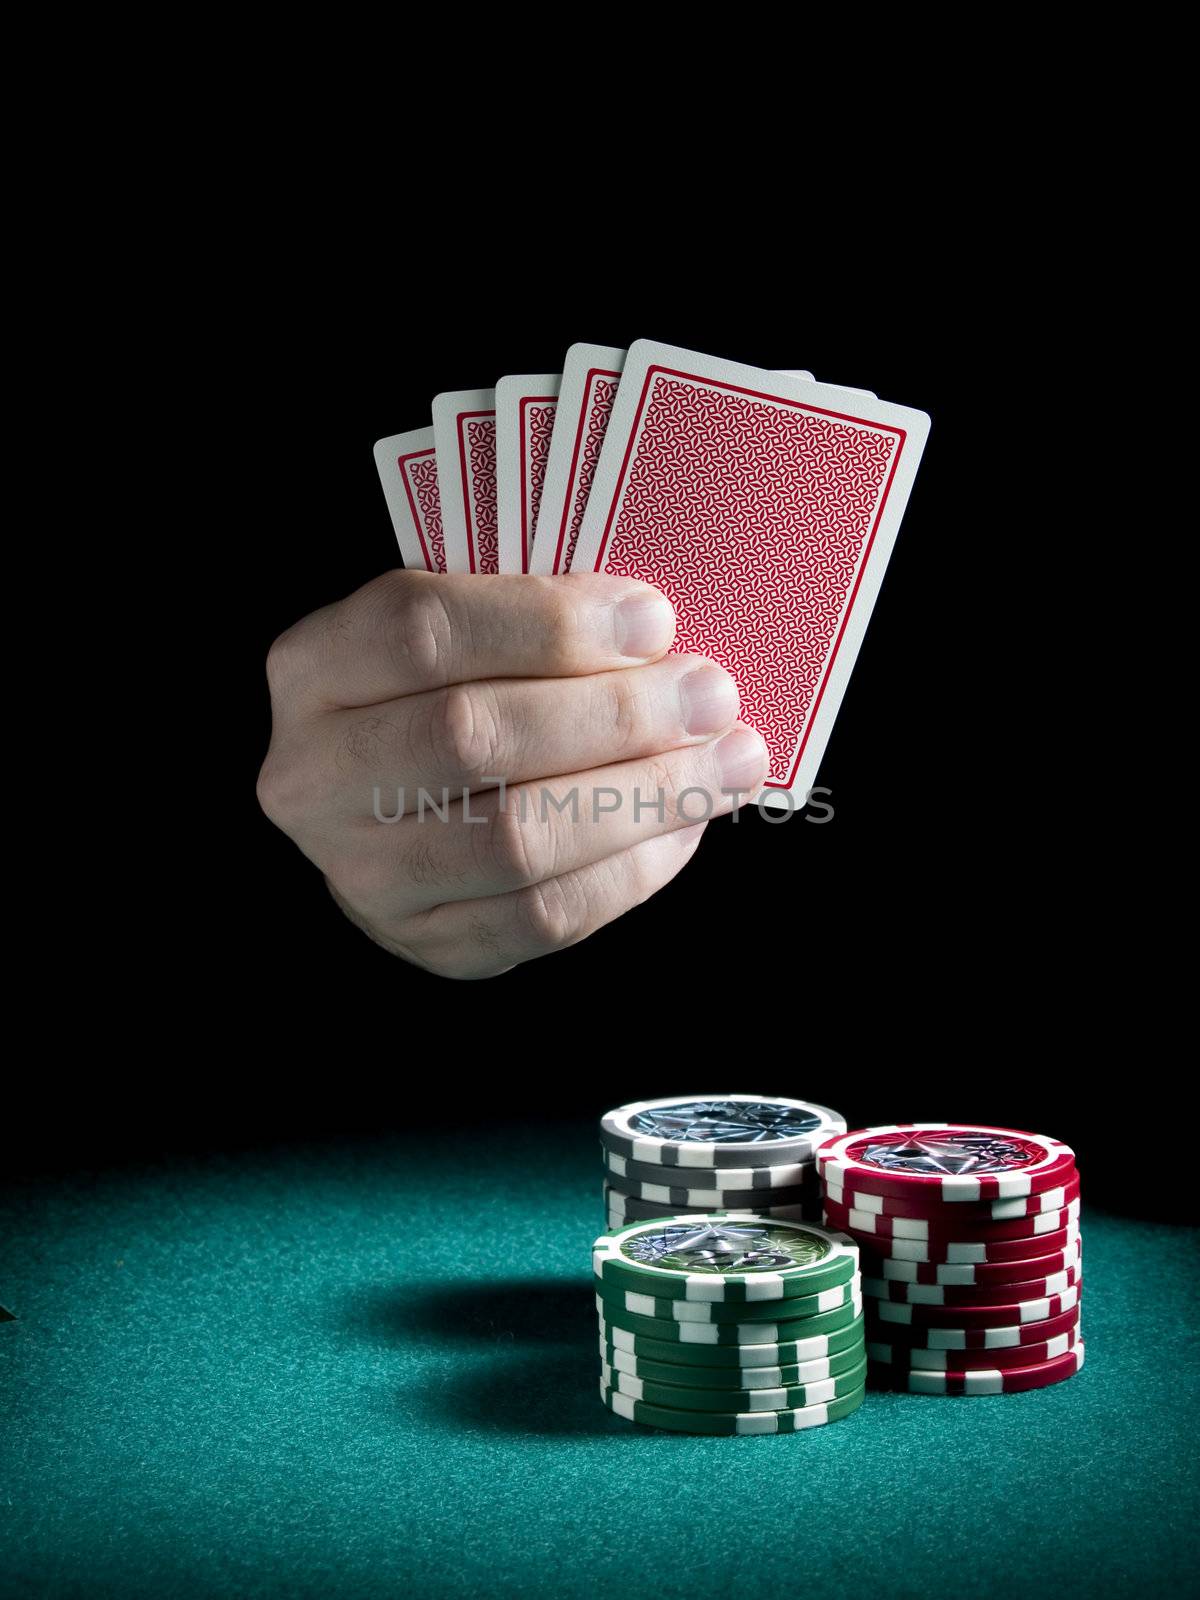 A man's hand holding four cards over three piles of different colors chips on a green felt.